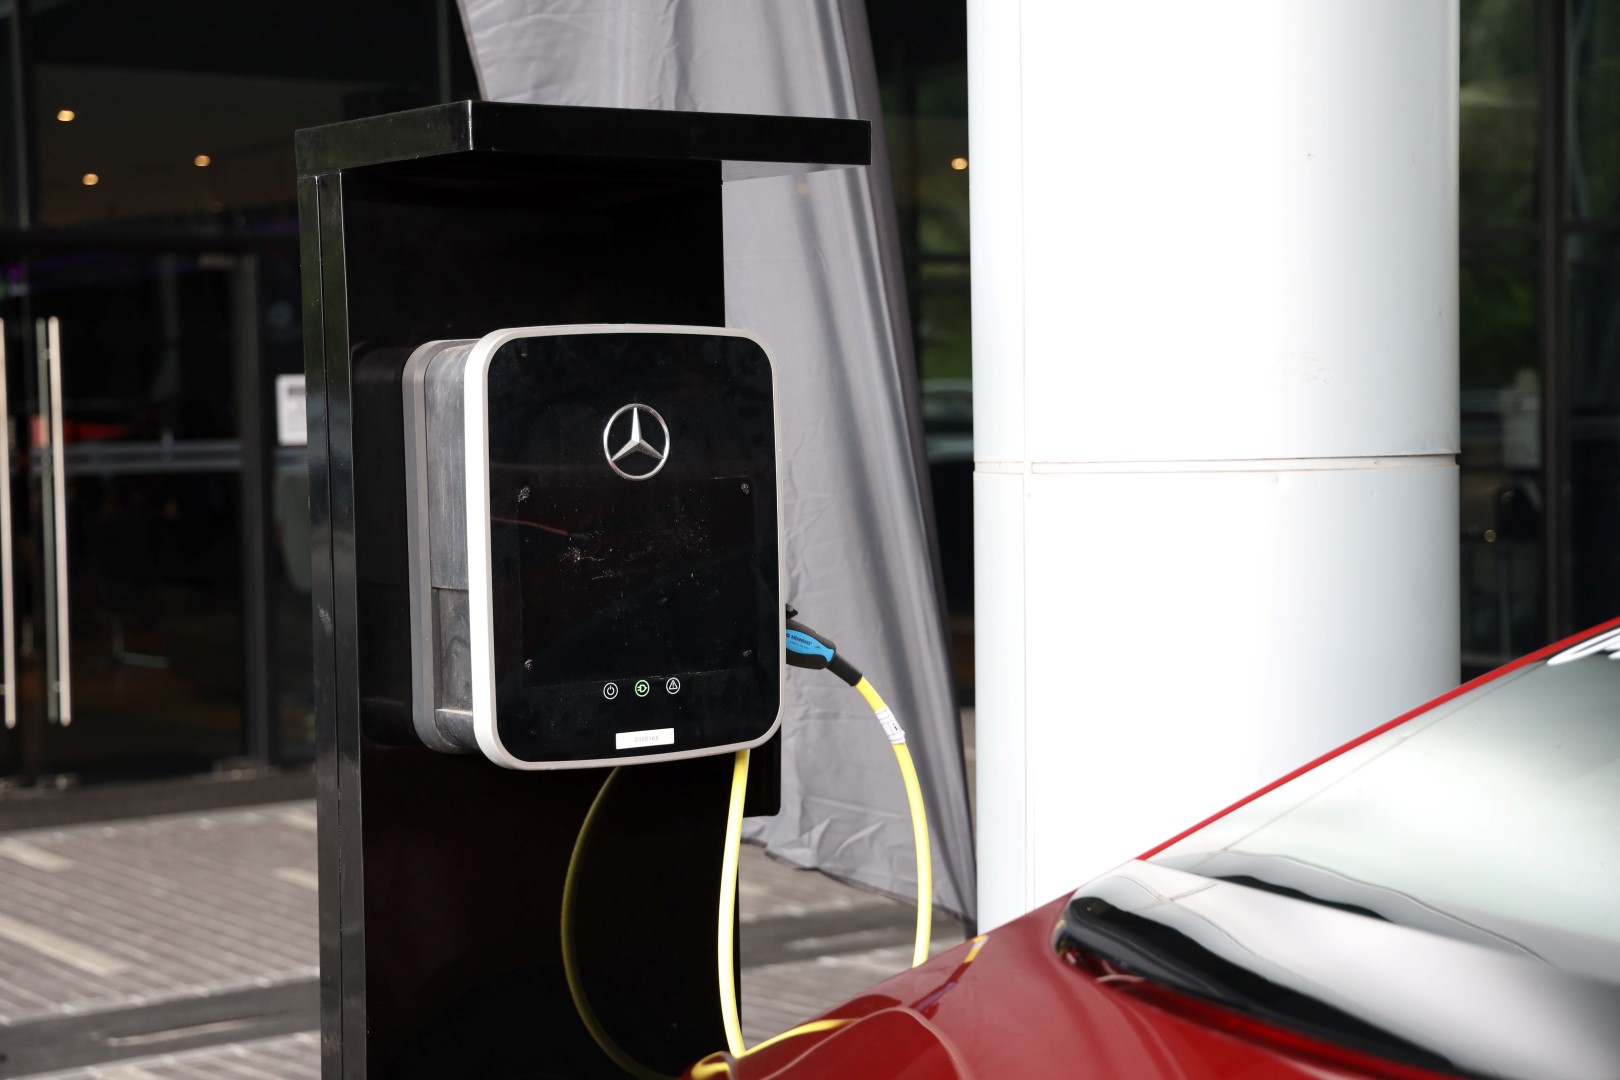 Mercedes-Benz EV owners, here are some road trip tips for you